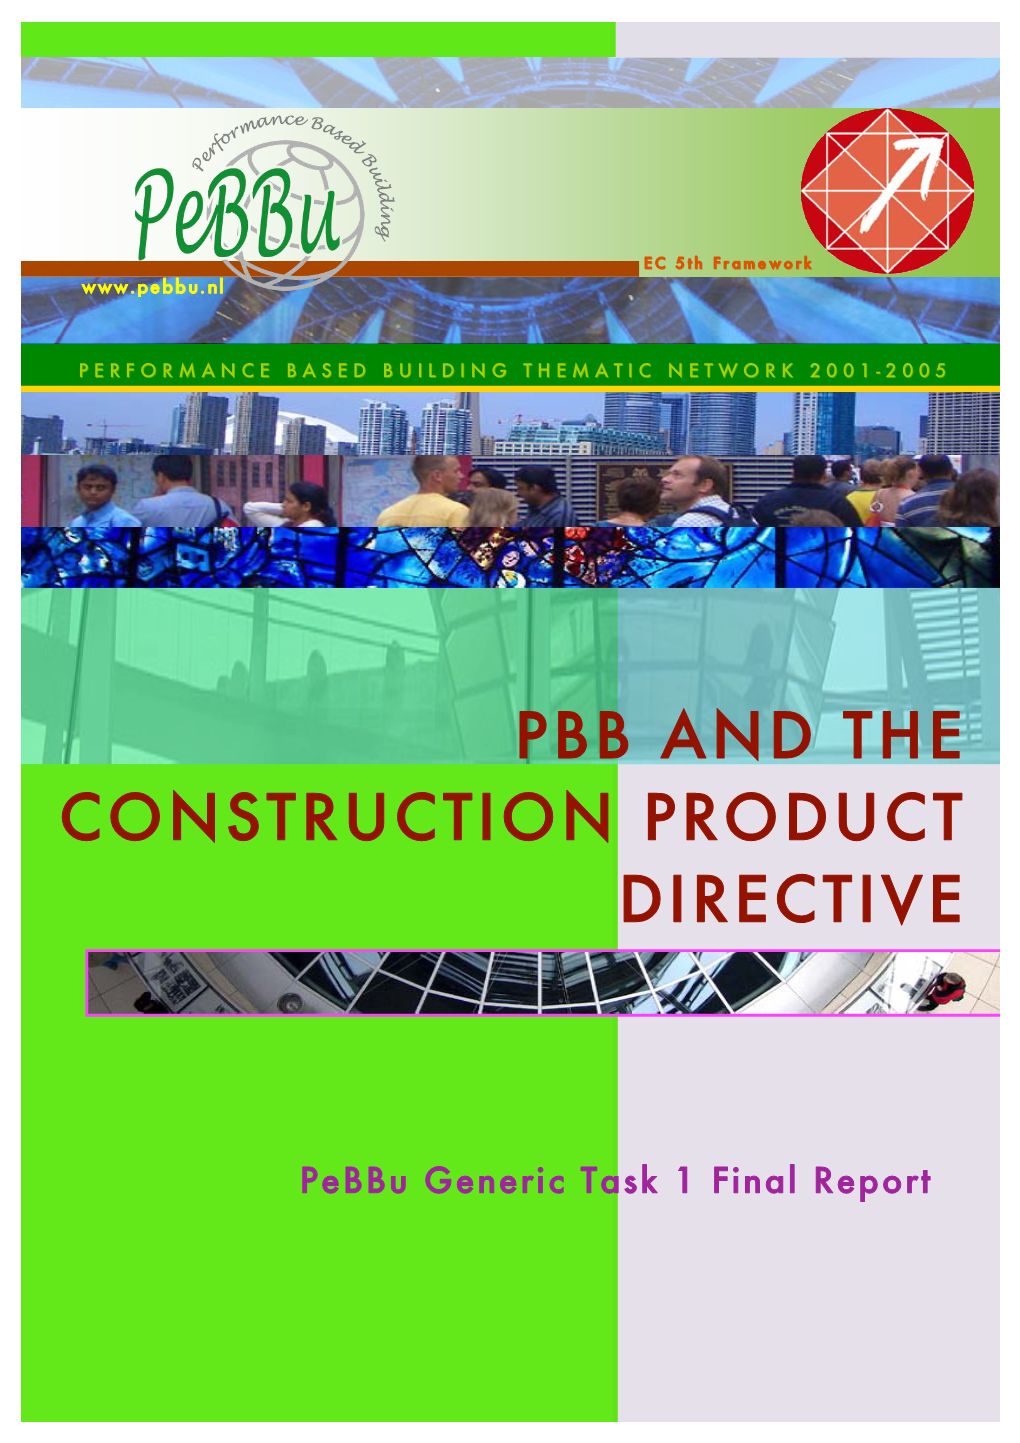 Pbb and the Construction Product Directive